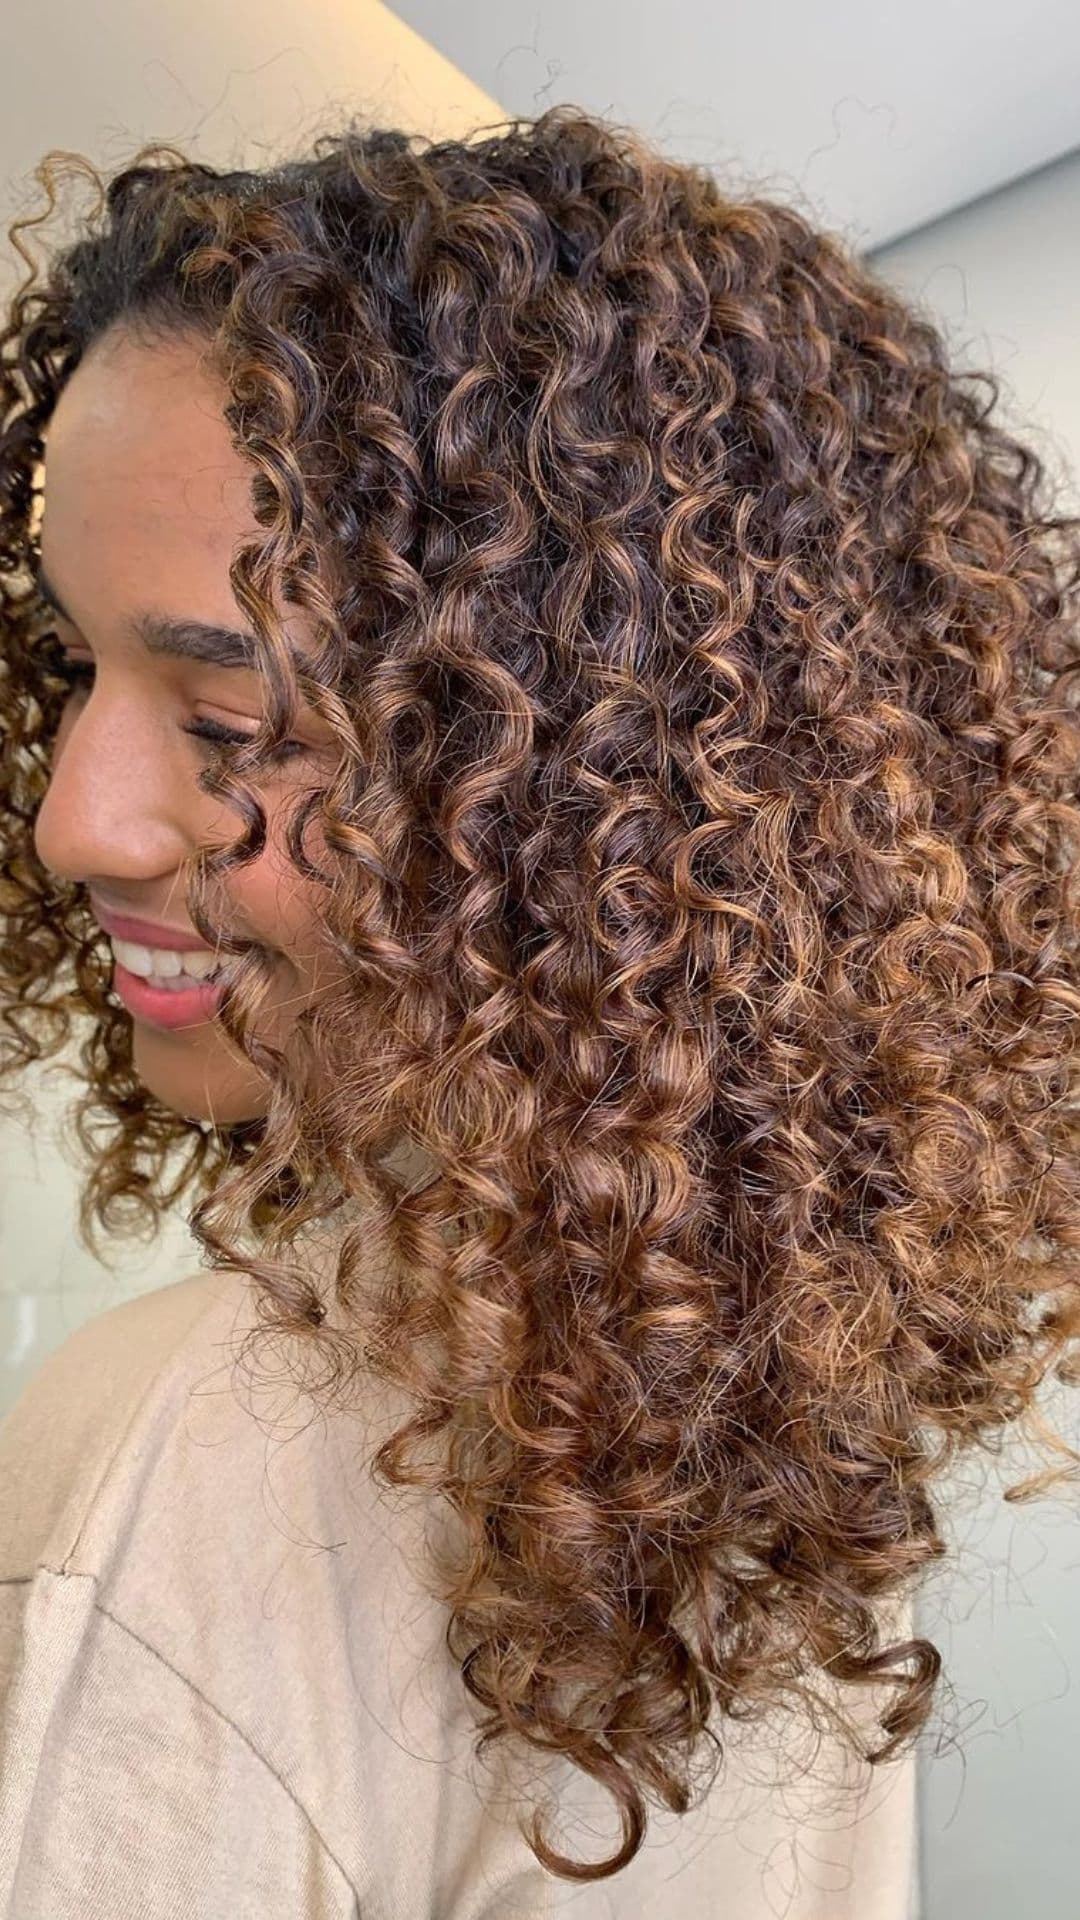 A woman modelling a natural curls with light brown accents.